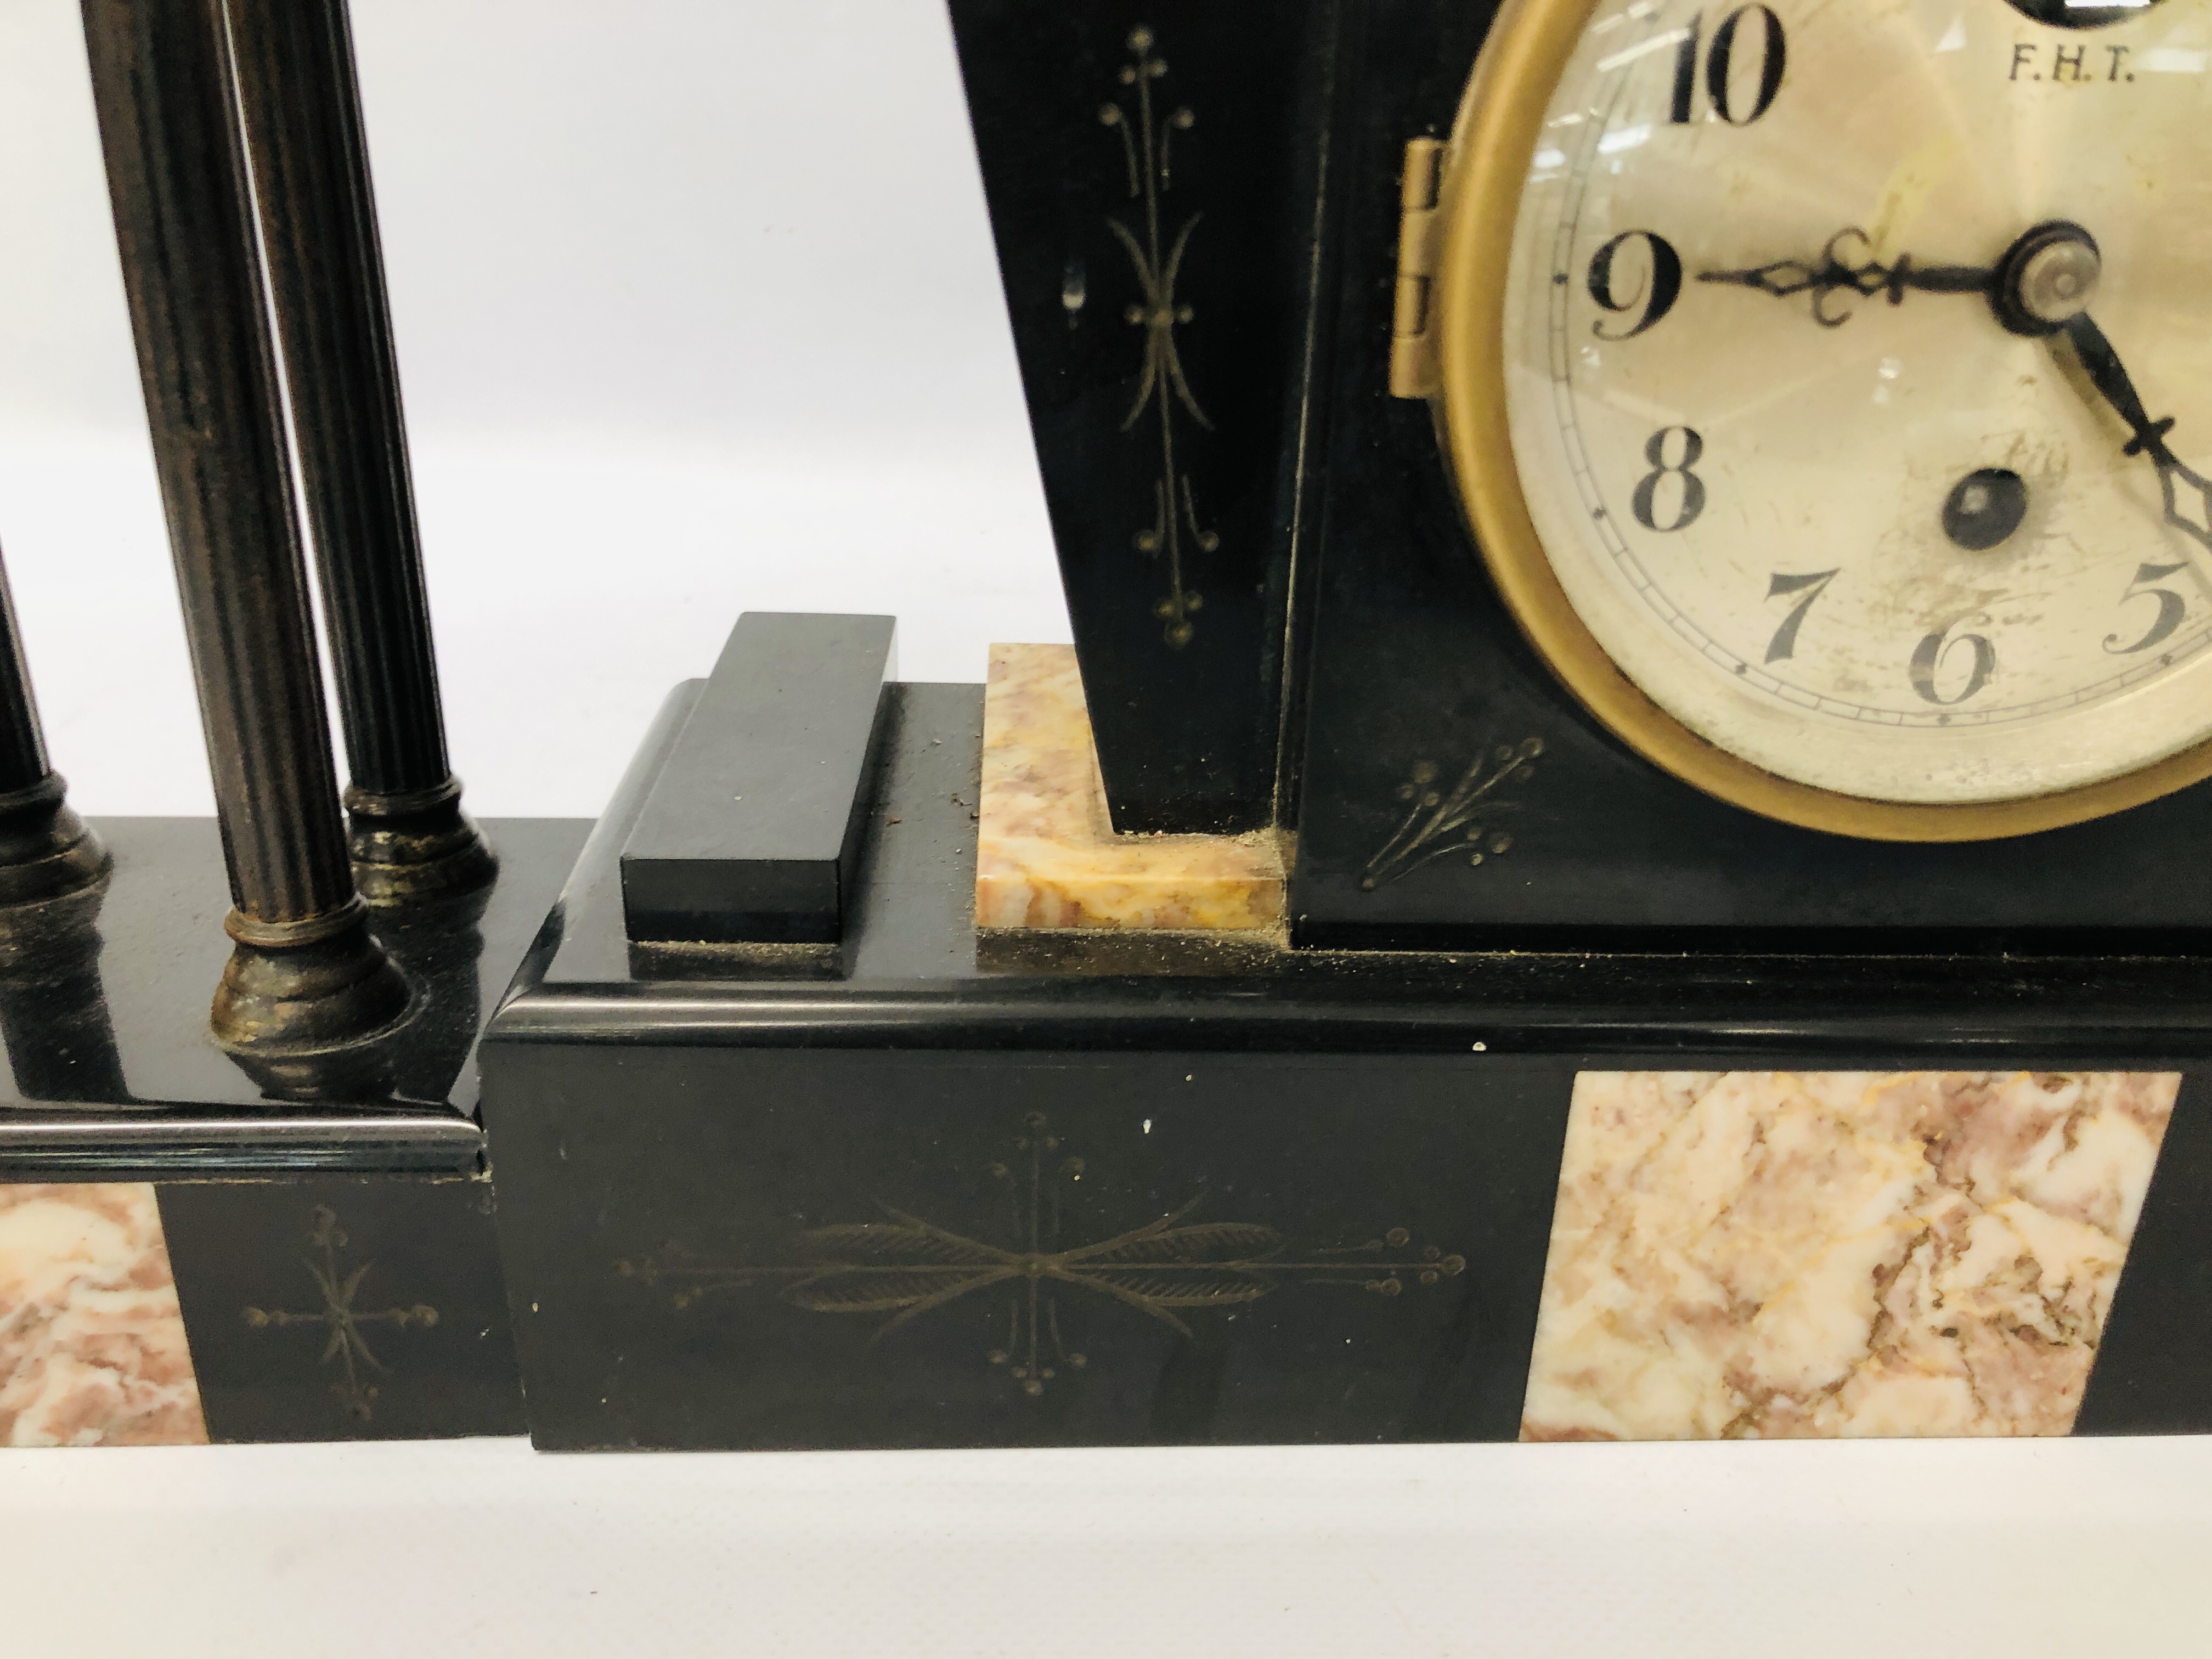 VINTAGE SLATE AND MARBLE MANTEL CLOCK AND GARNITURES MARKED F.H.T. - Image 6 of 12